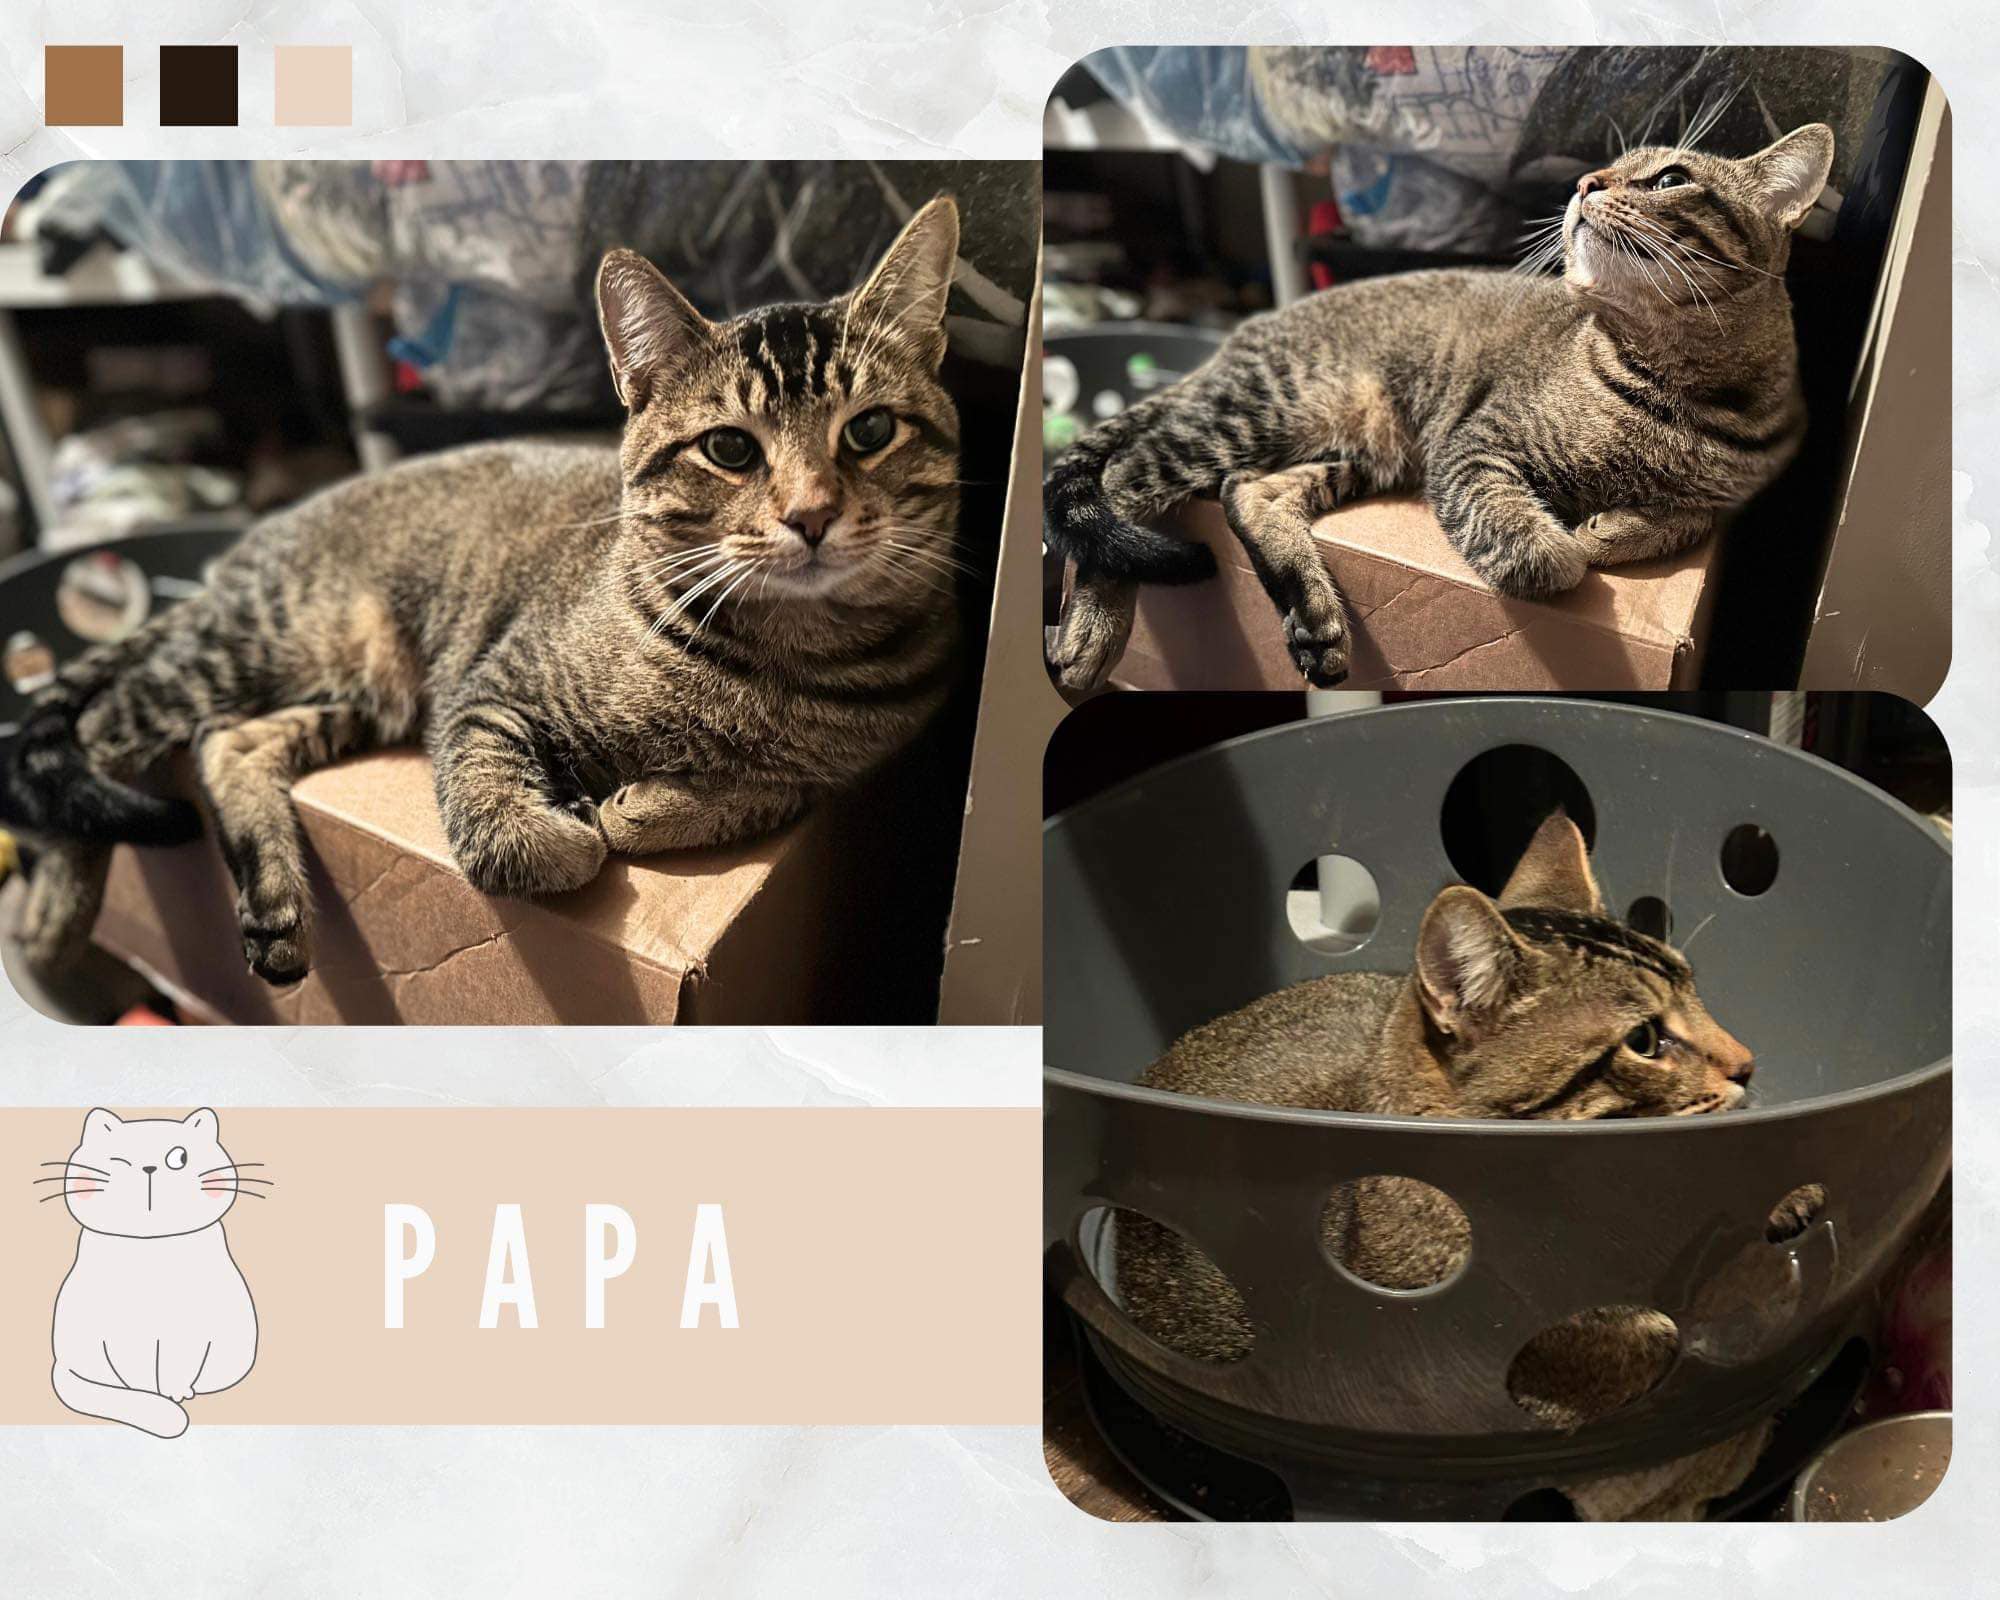 Papa beautiful tabby cat for adoption in the edmonton area